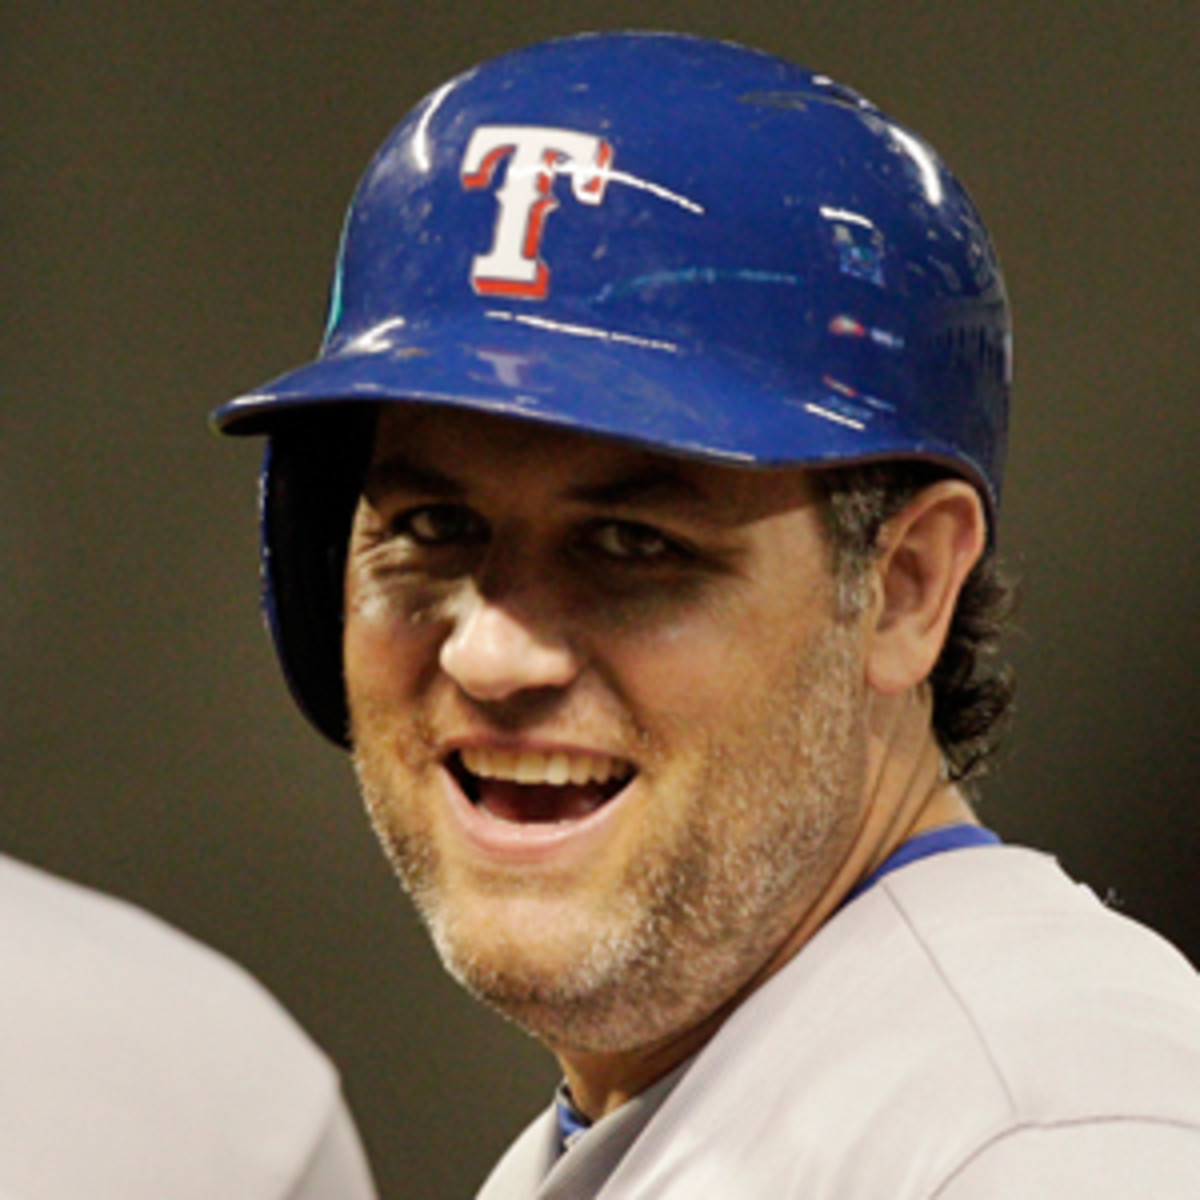 Lance Berkman has not enjoyed playing 177 games at Wrigley Field in his 14 MLB seasons. (Bob Levey/Getty Images)